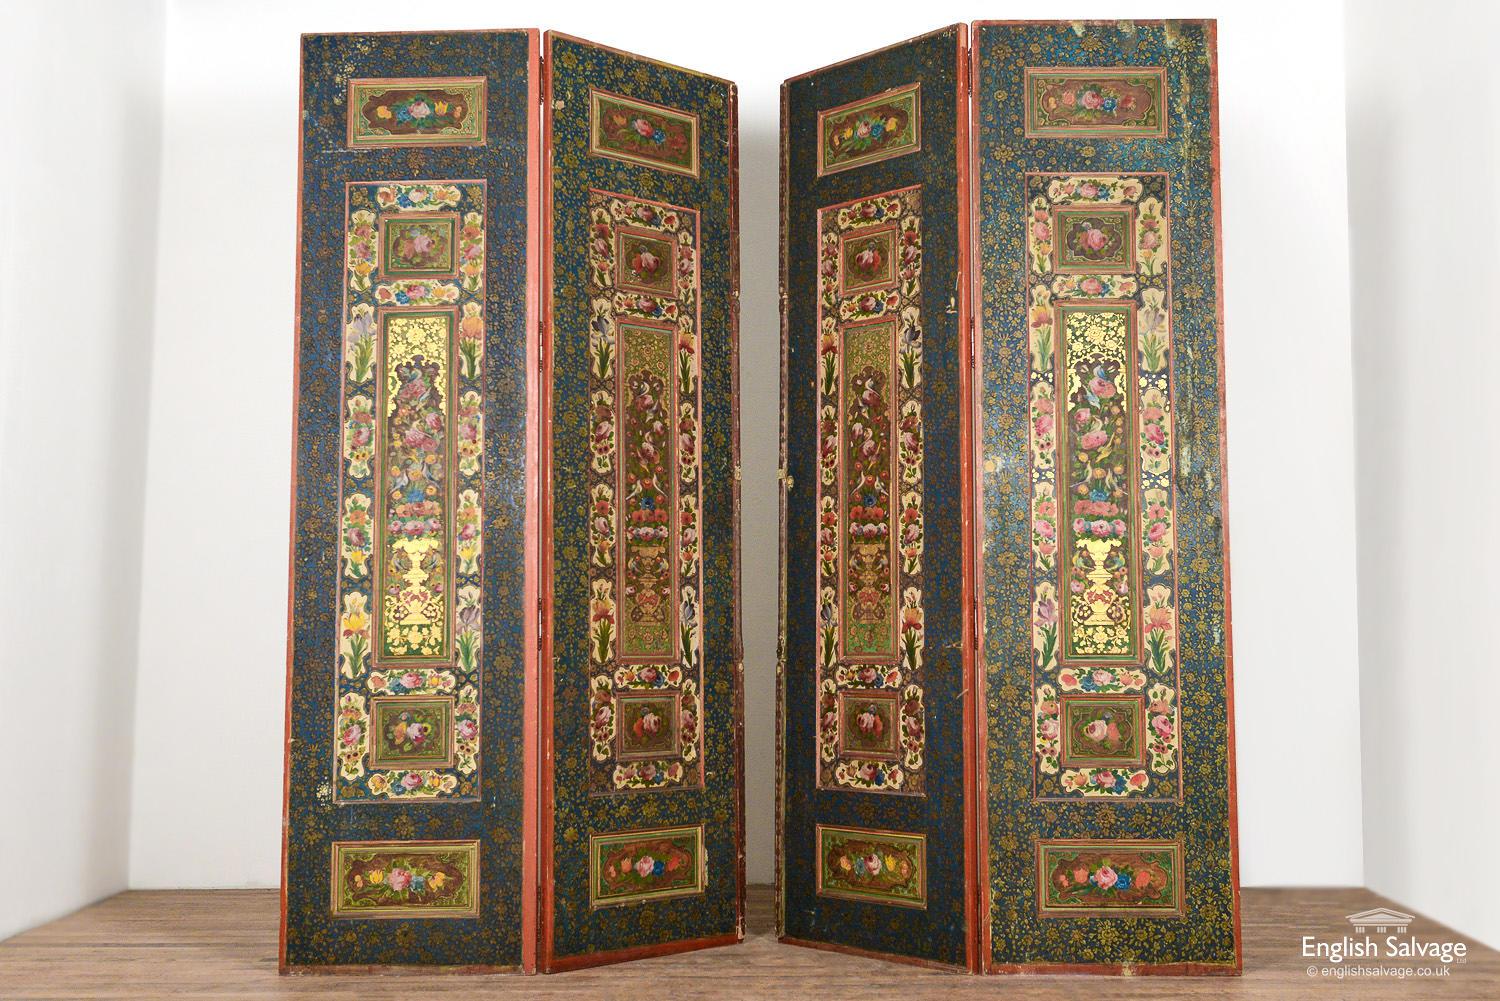 19th century Persian Qajar polychrome painted and gilt panels / dividers / folding doors adorned with beautifully painted birds, irises and roses on a blue background with red and gilt highlights. The left hand side divider is 143cm wide and the